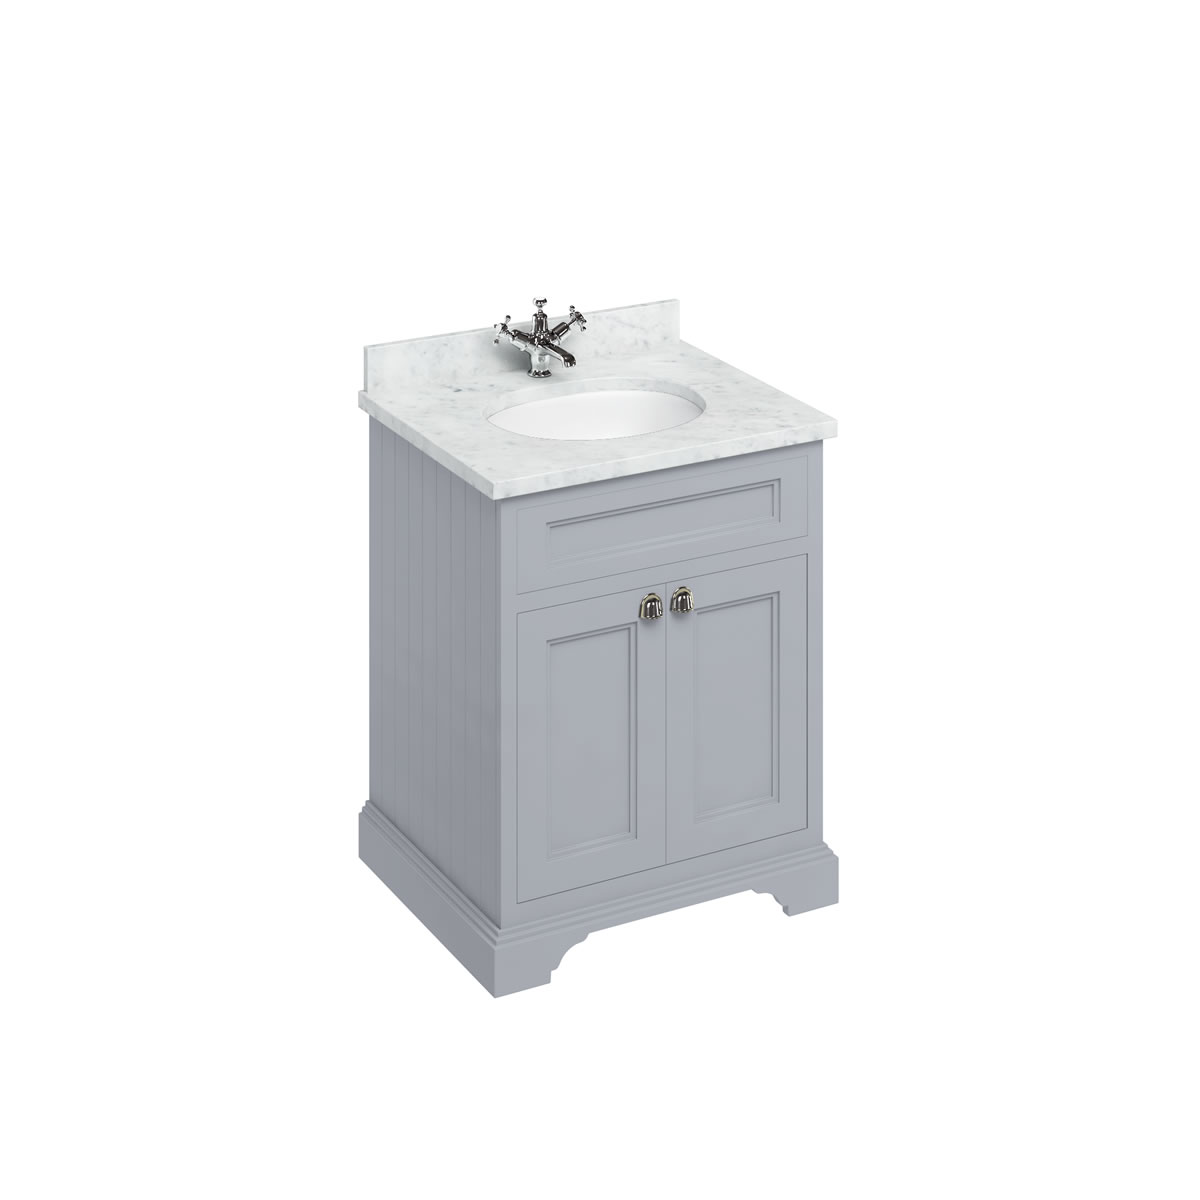 Freestanding 65 Vanity Unit with doors - Classic Grey and Minerva Carrara white worktop with integrated white basin 